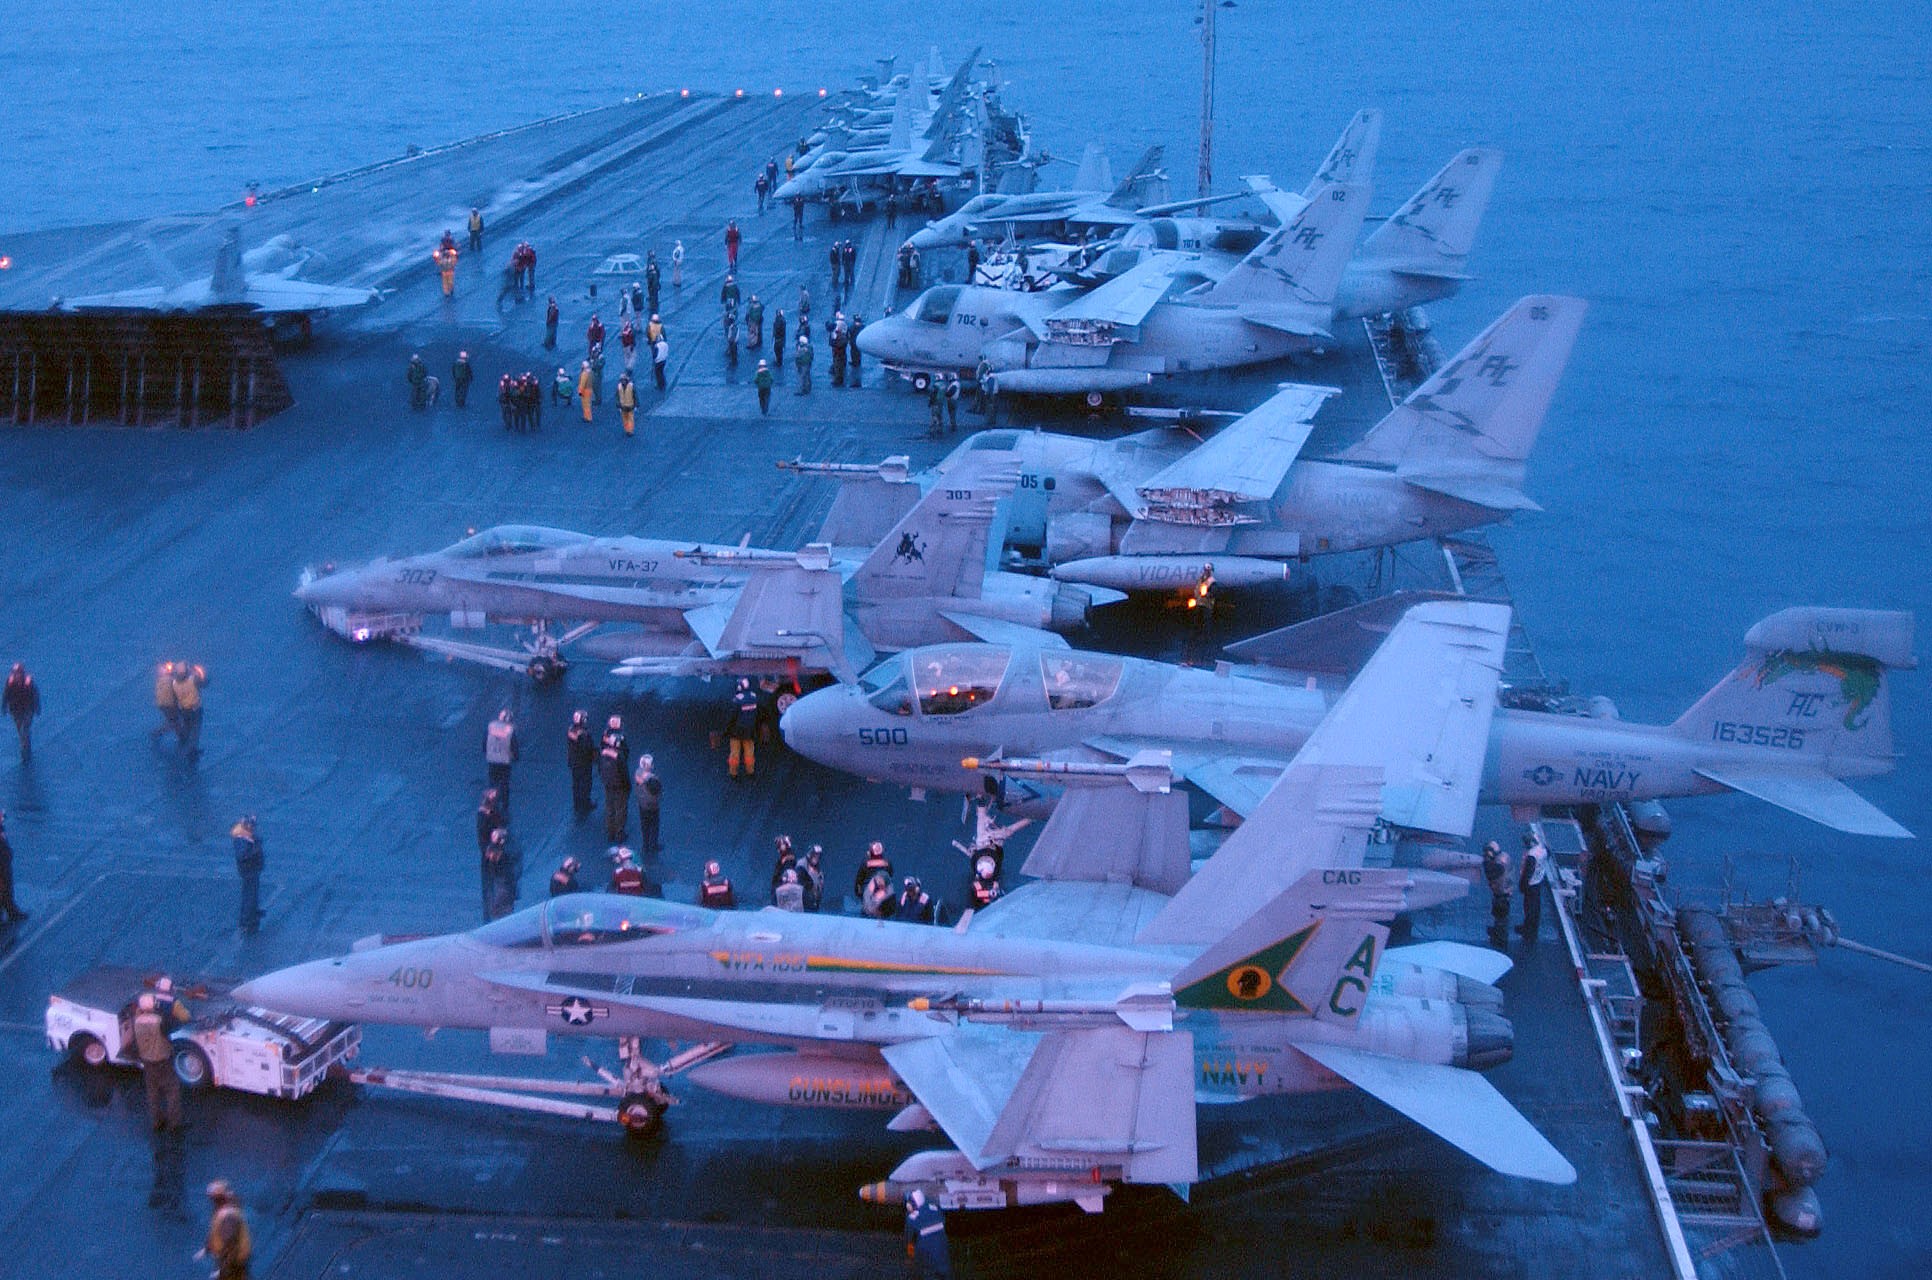 cvw-3 carrier air wing us navy uss harry s. truman cvn-75 embarked squadrons 06